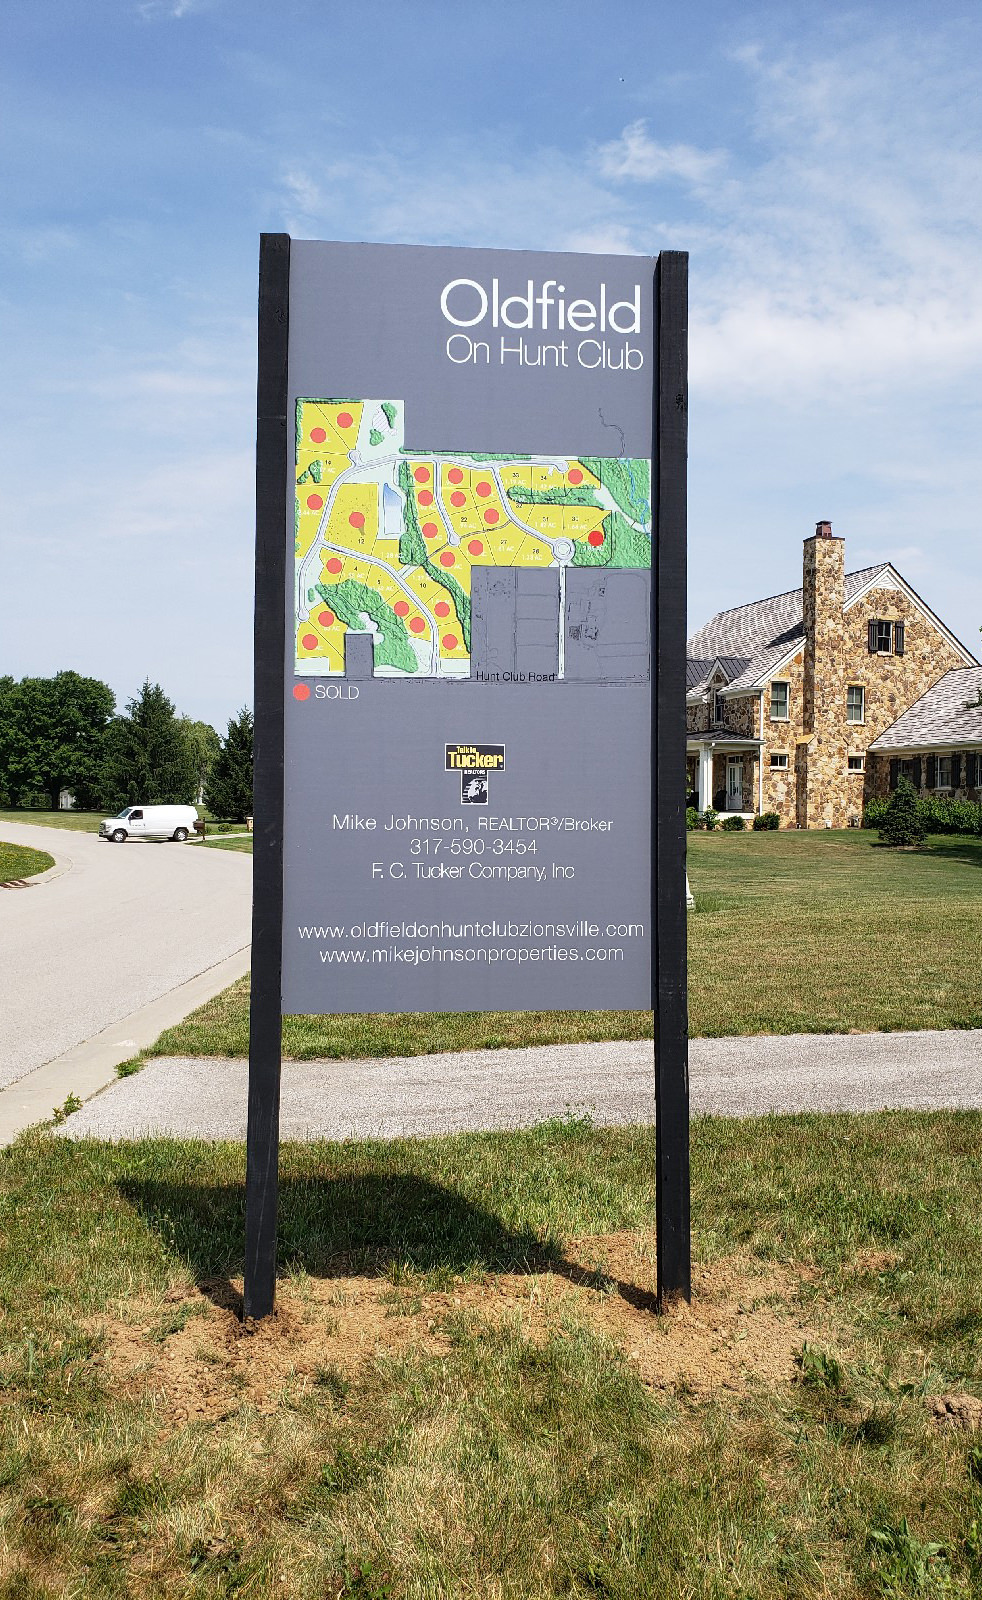 Property Site Signs